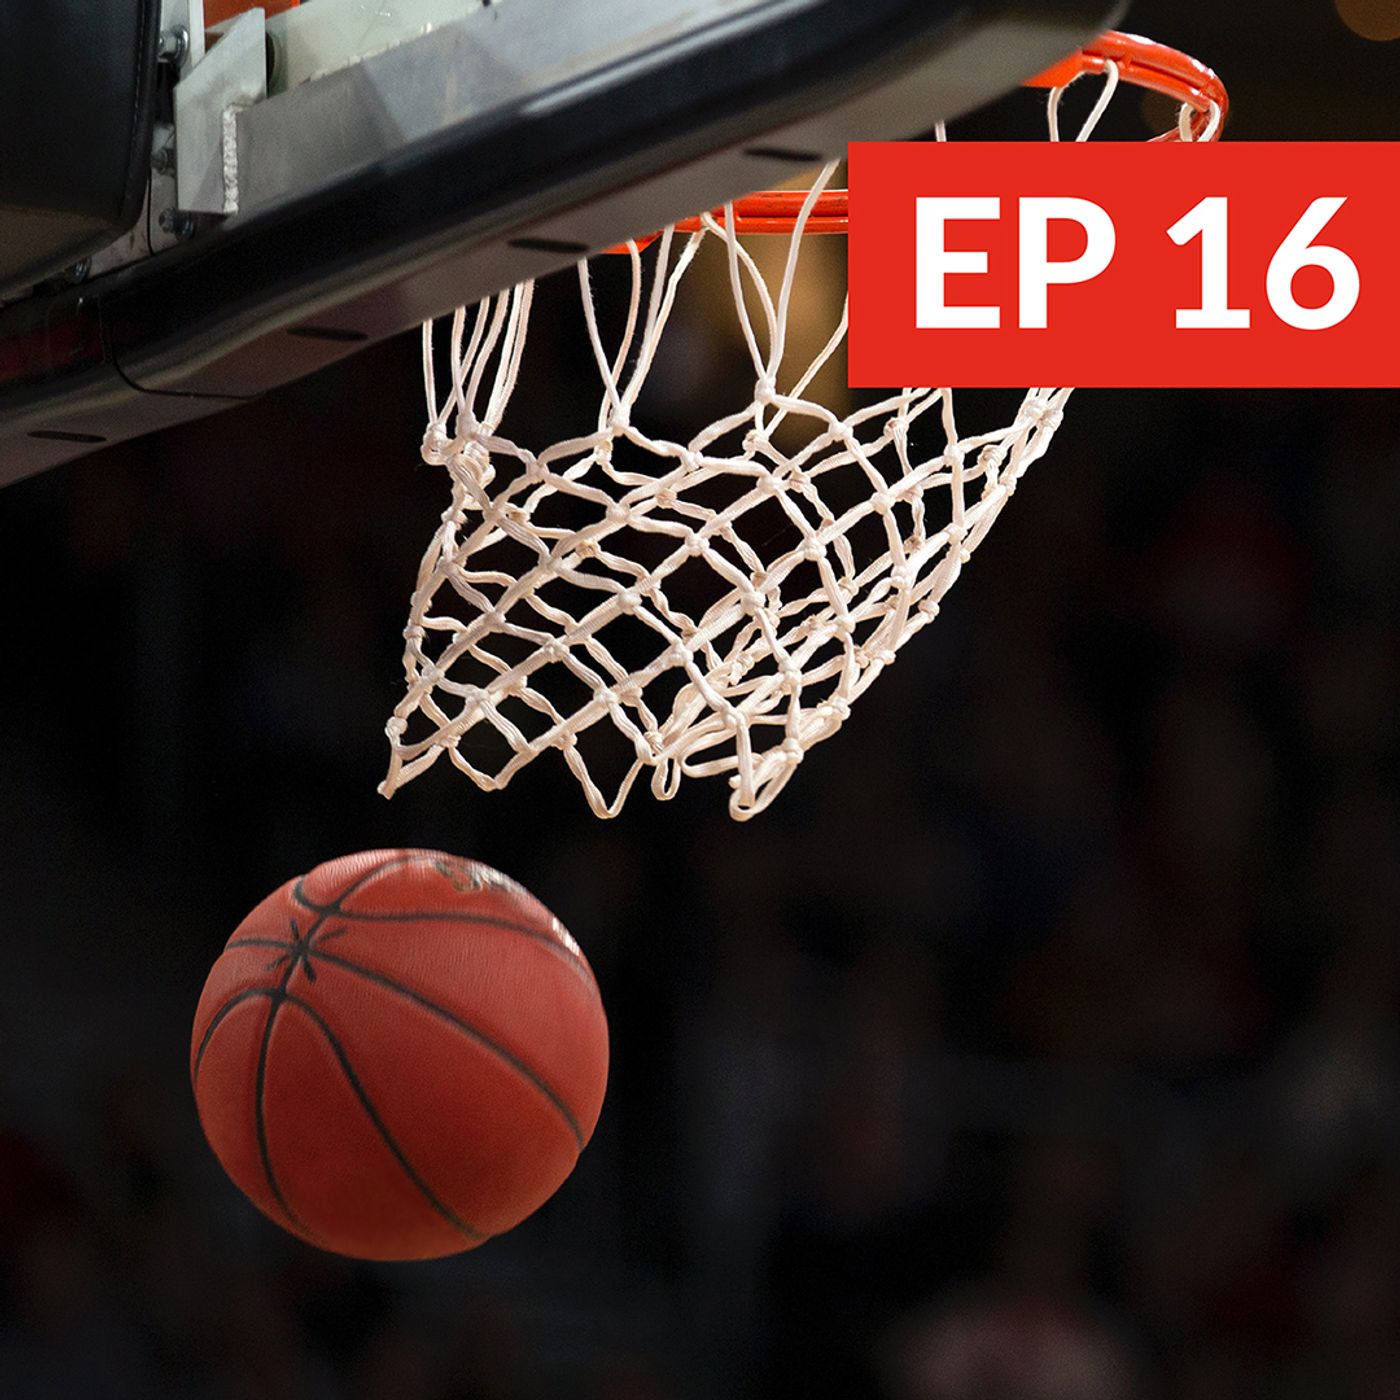 16: Real-time Training Guidance and Better Athlete Relationships - With Jaime Fernandez, University of Arizona Women's Basketball – Ep. 16